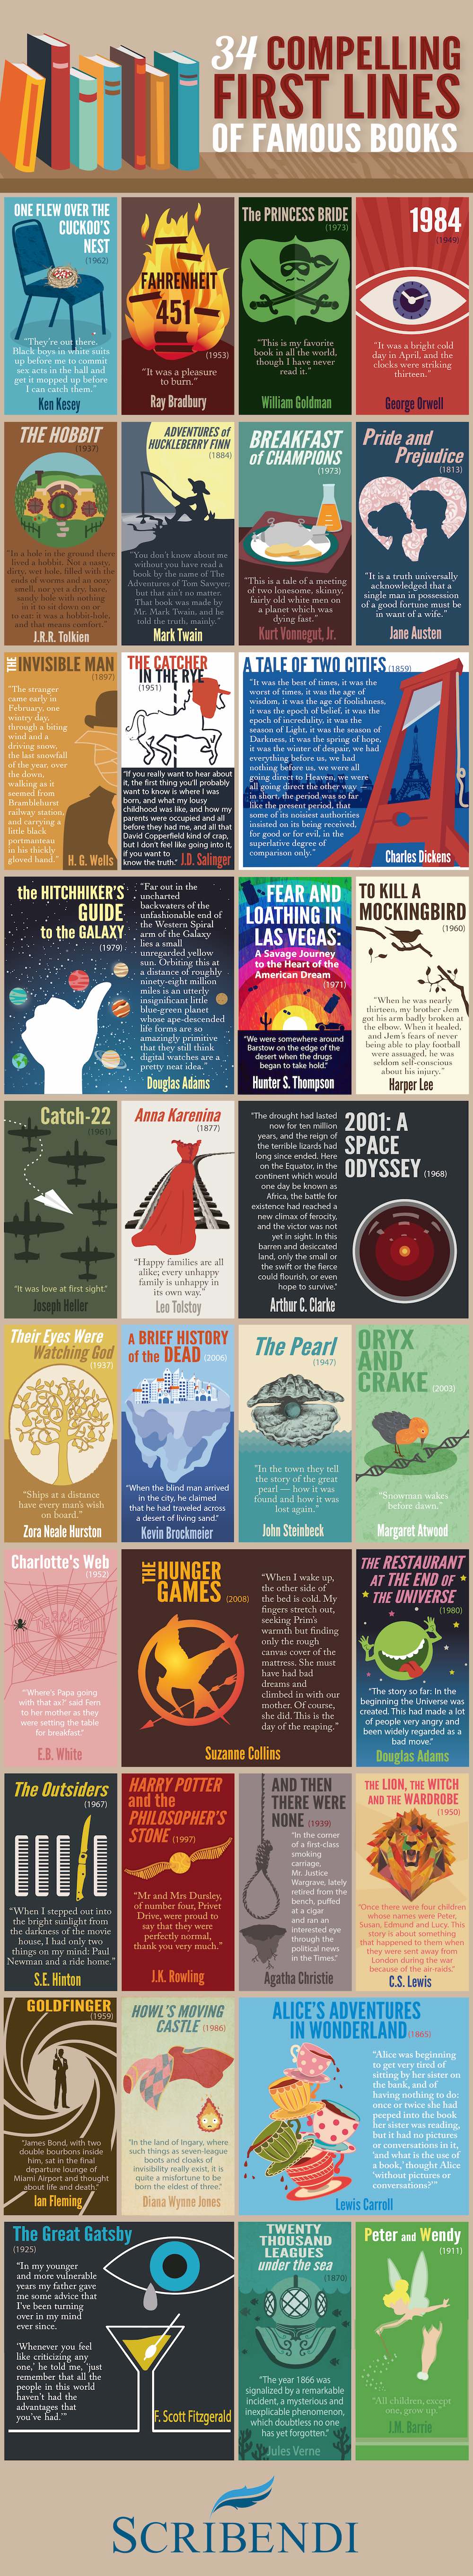 t lines of famous books - infographic